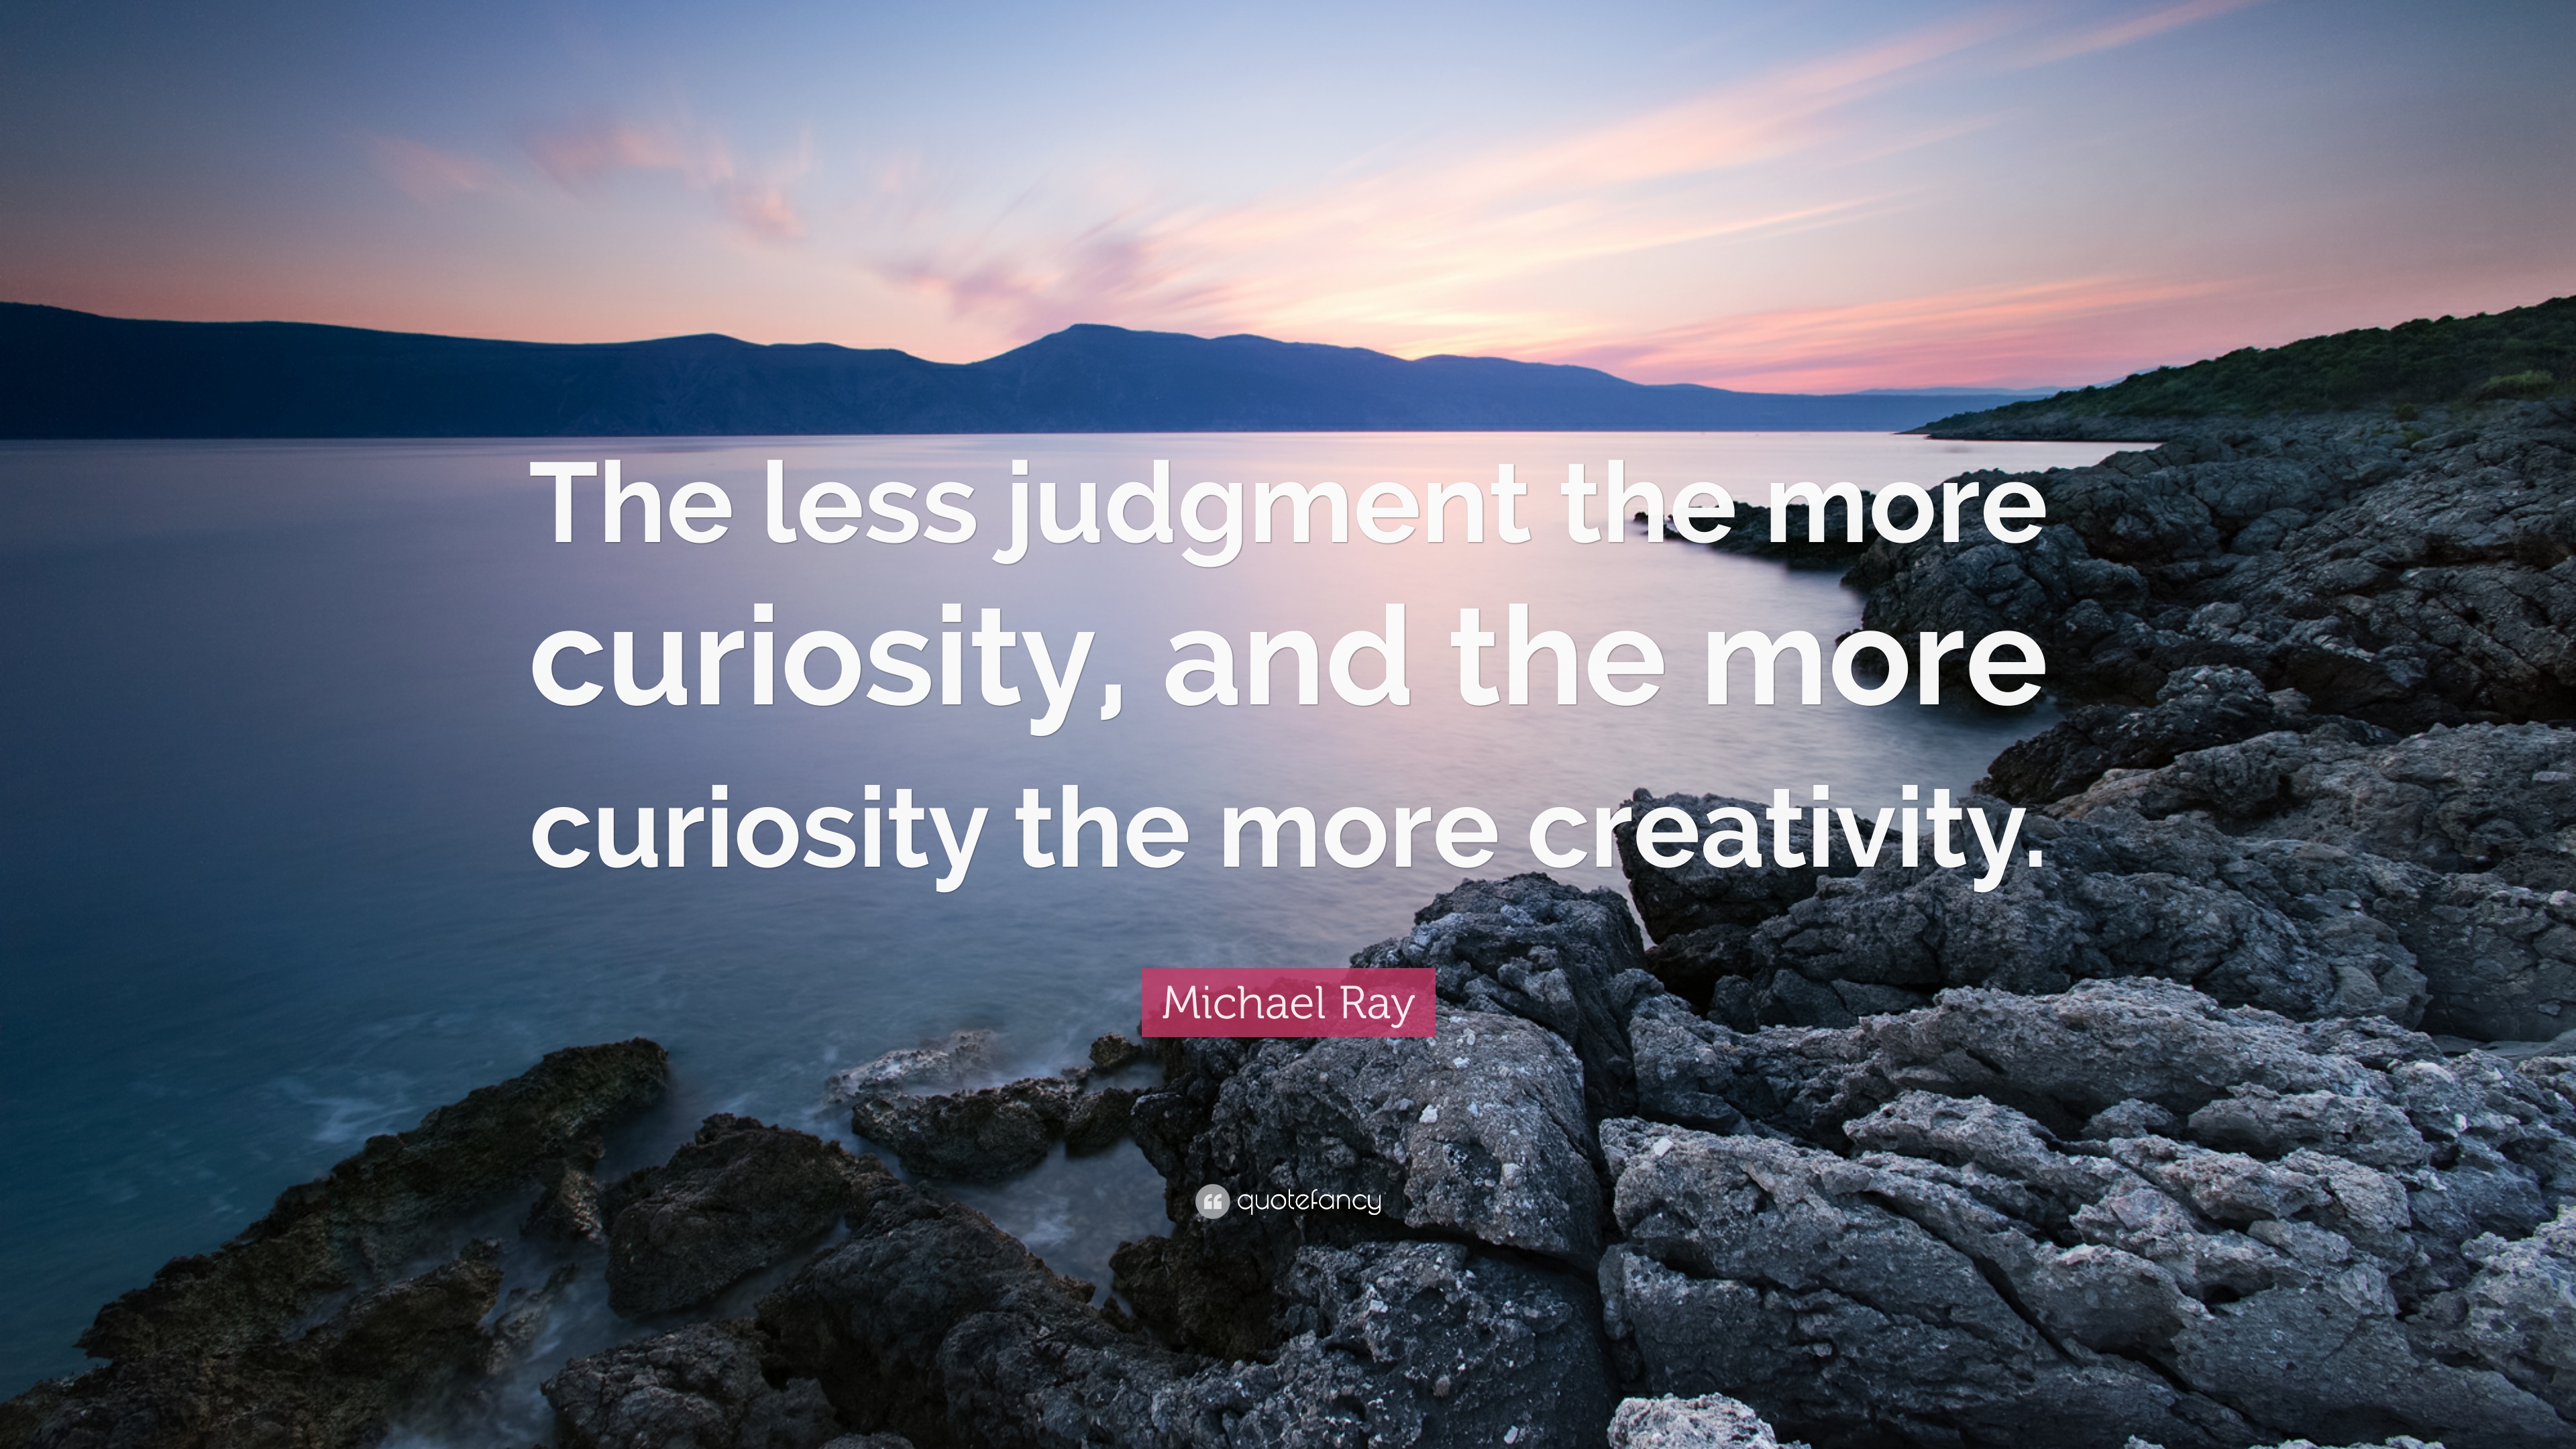 Michael Ray Quote: “The less judgment the more curiosity